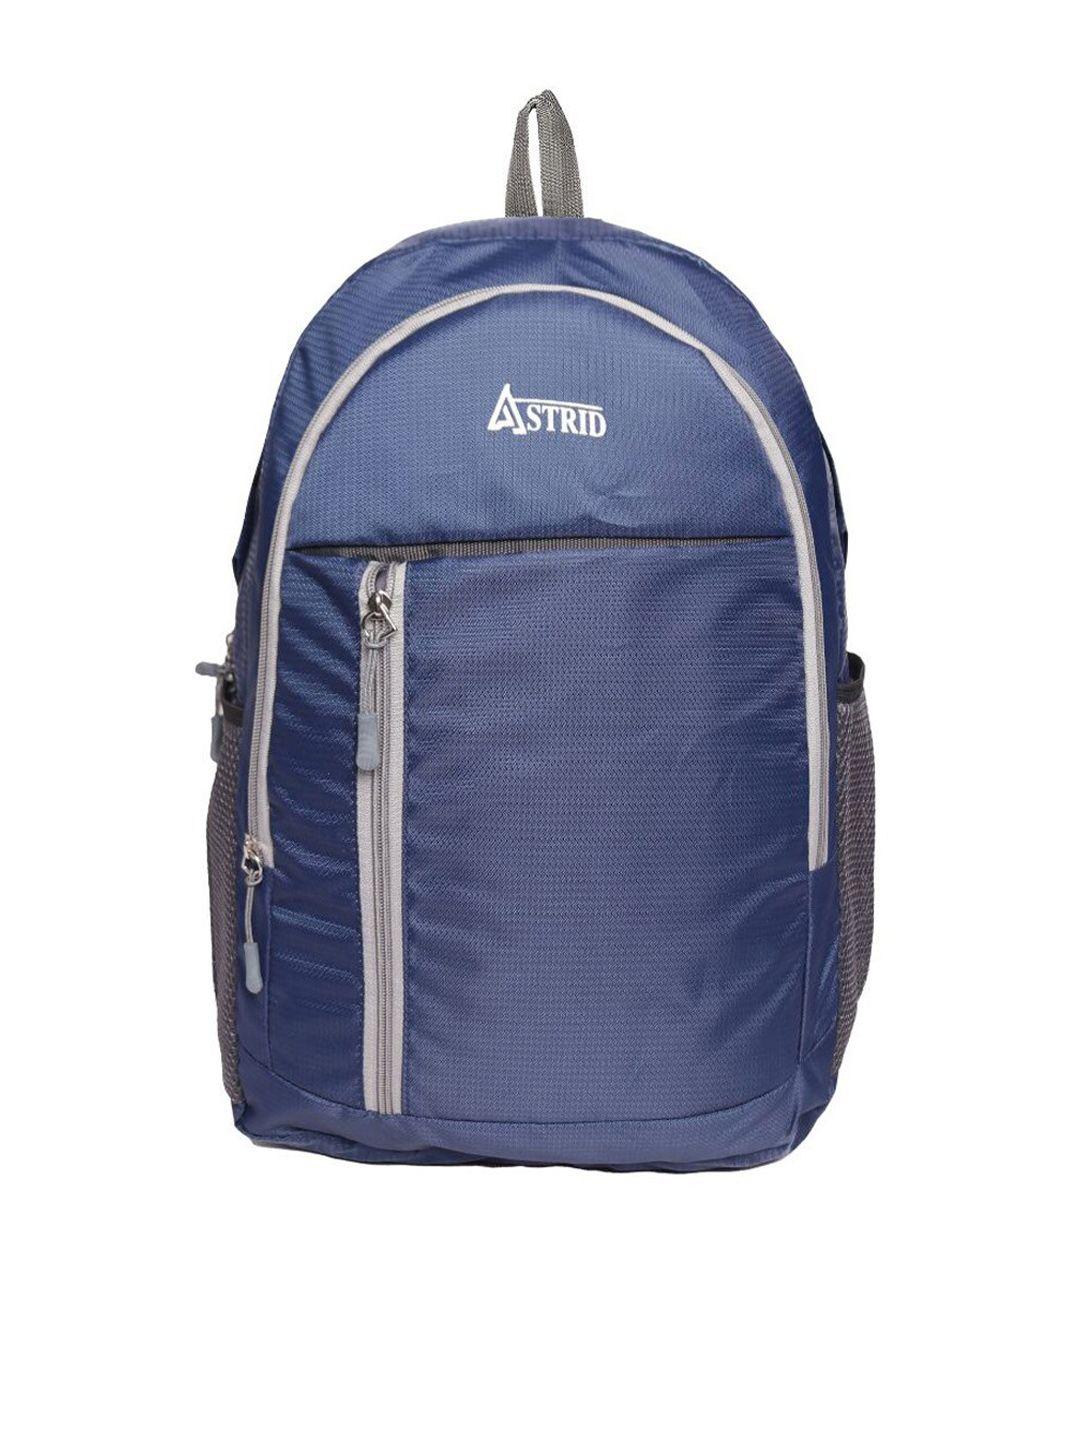 astrid men multicompartment backpack